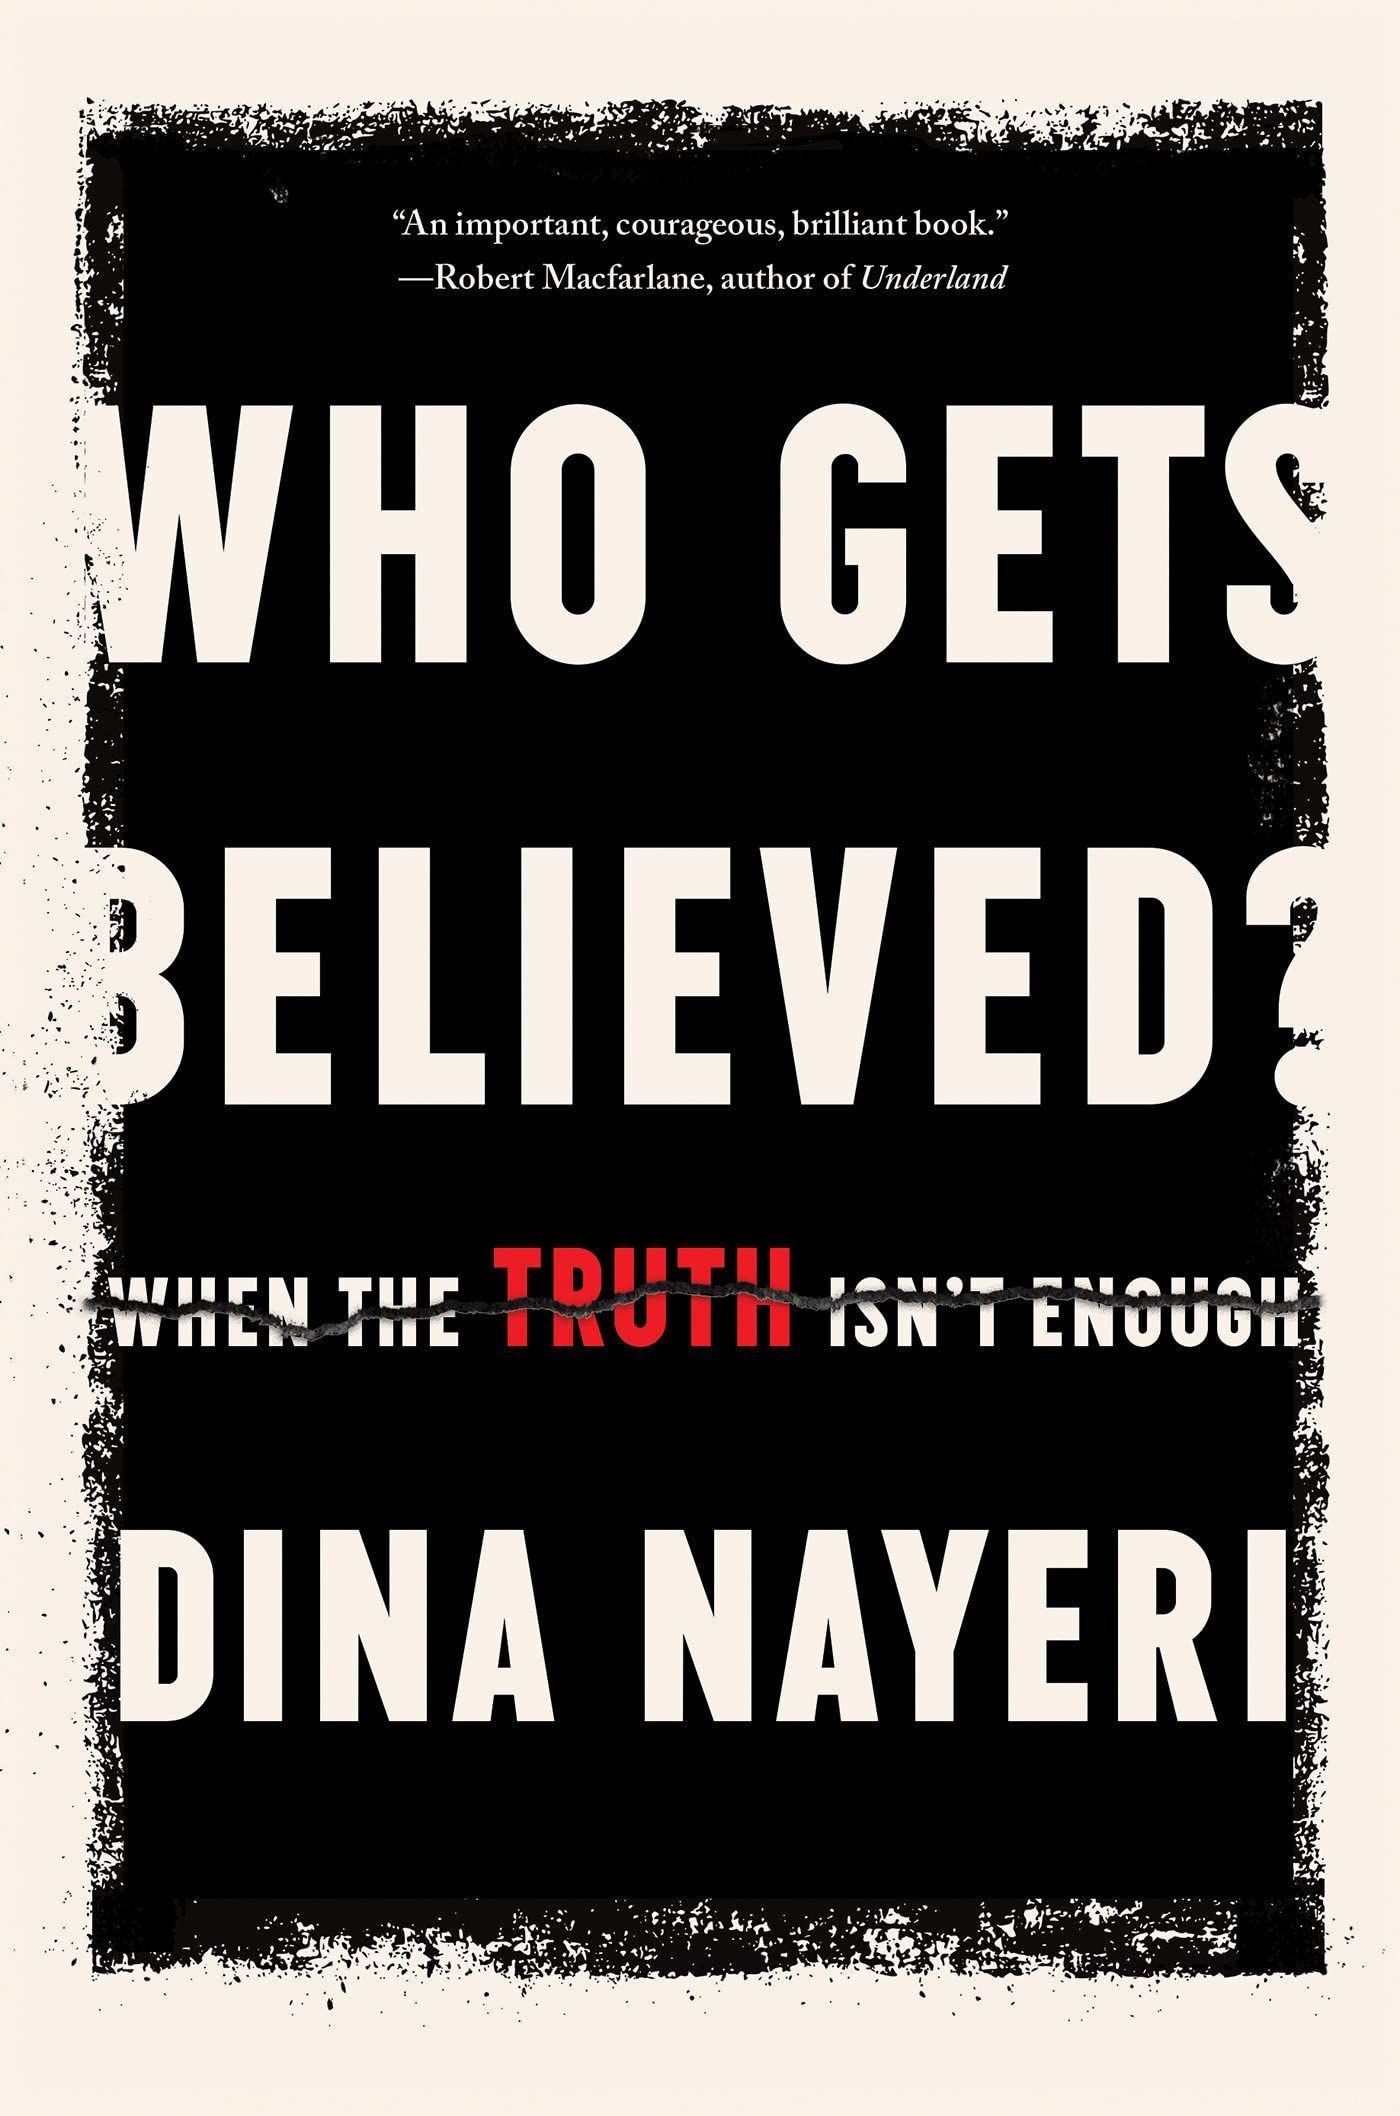 Narratives Passed Up, Narratives Passed Down: An Interview with Dina Nayeri